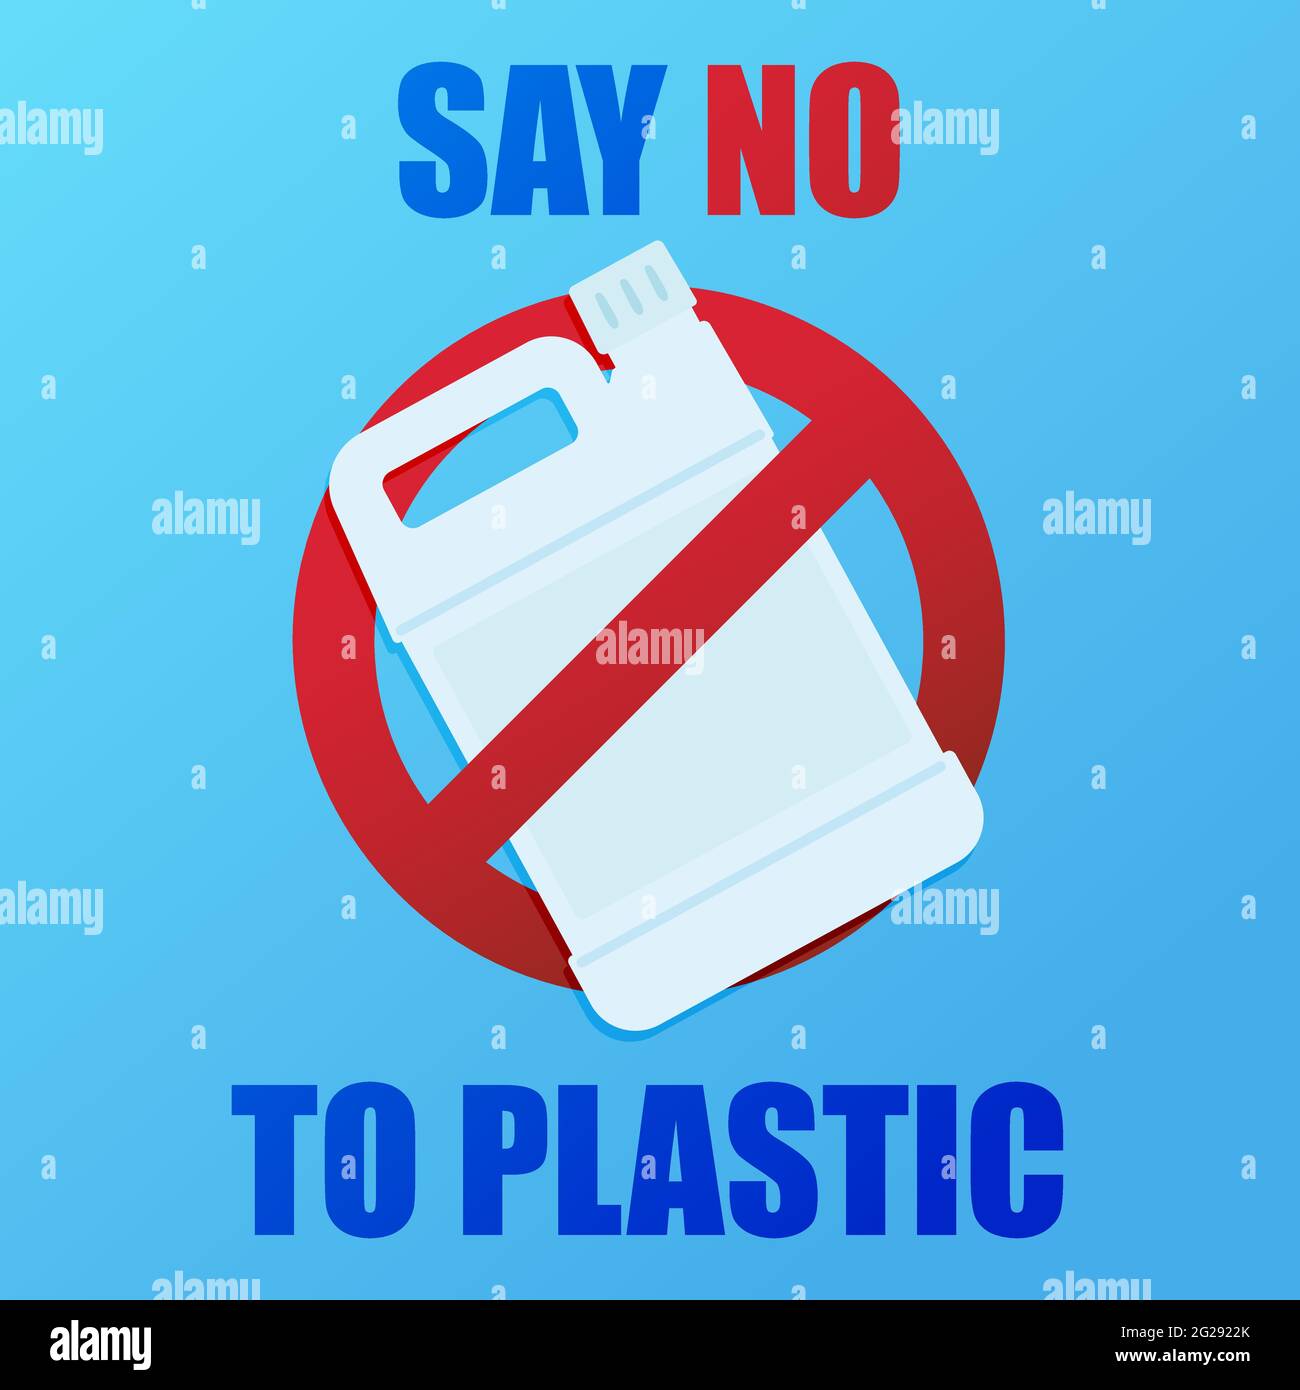 Stop plastic pollution. Save our Earth. A banner with a red prohibition sign crosses out the plastic bottle. Environmental poster. Say no to plastic. Stock Vector